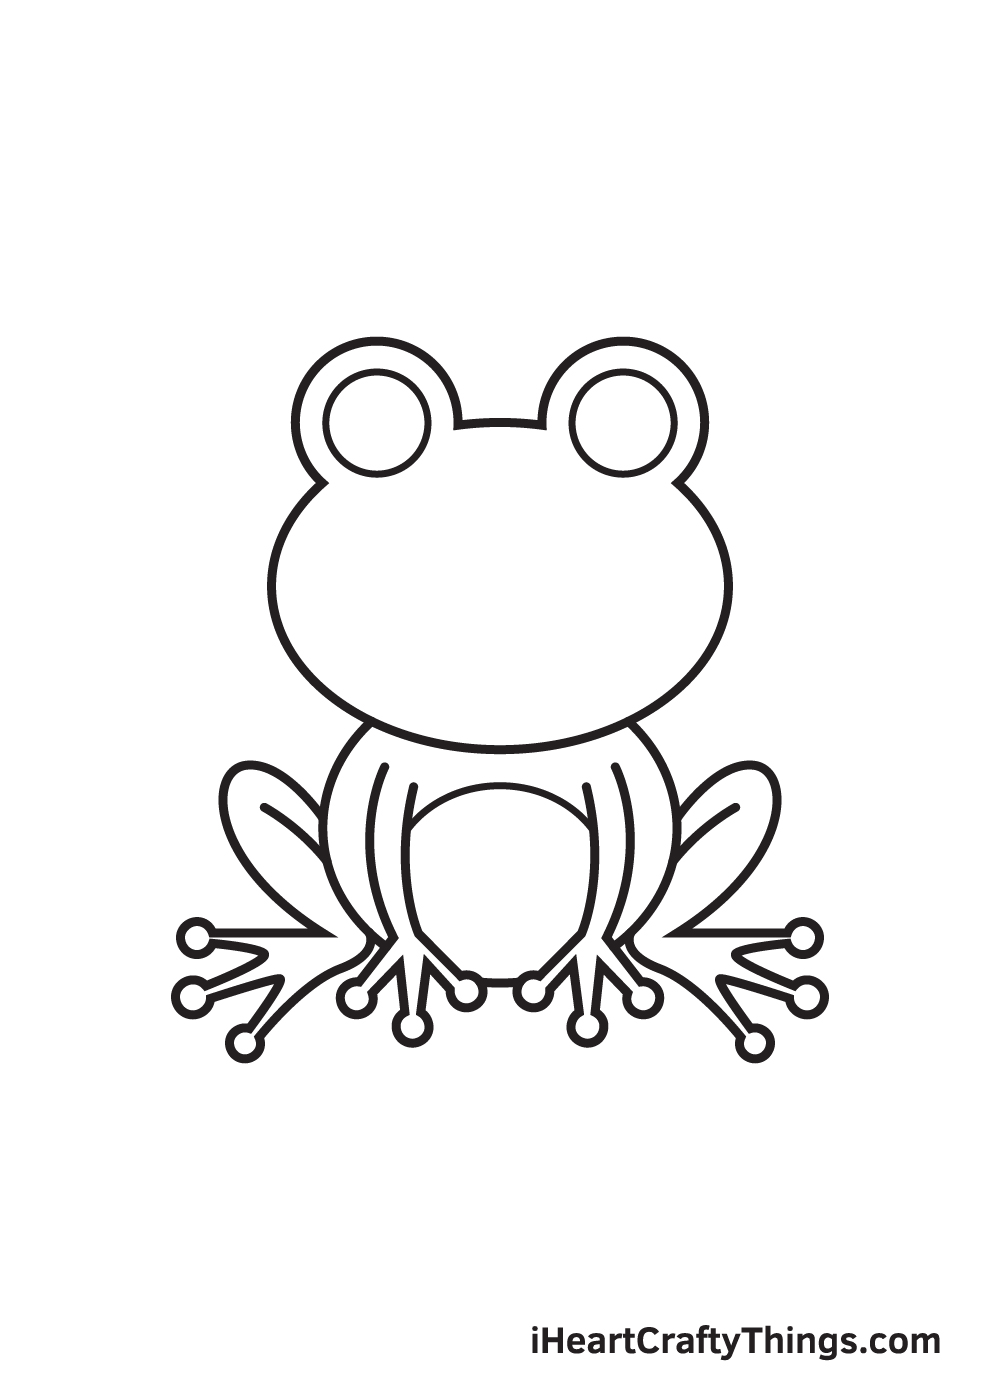 A pencil sketch drawing of a frog, black and white background on Craiyon